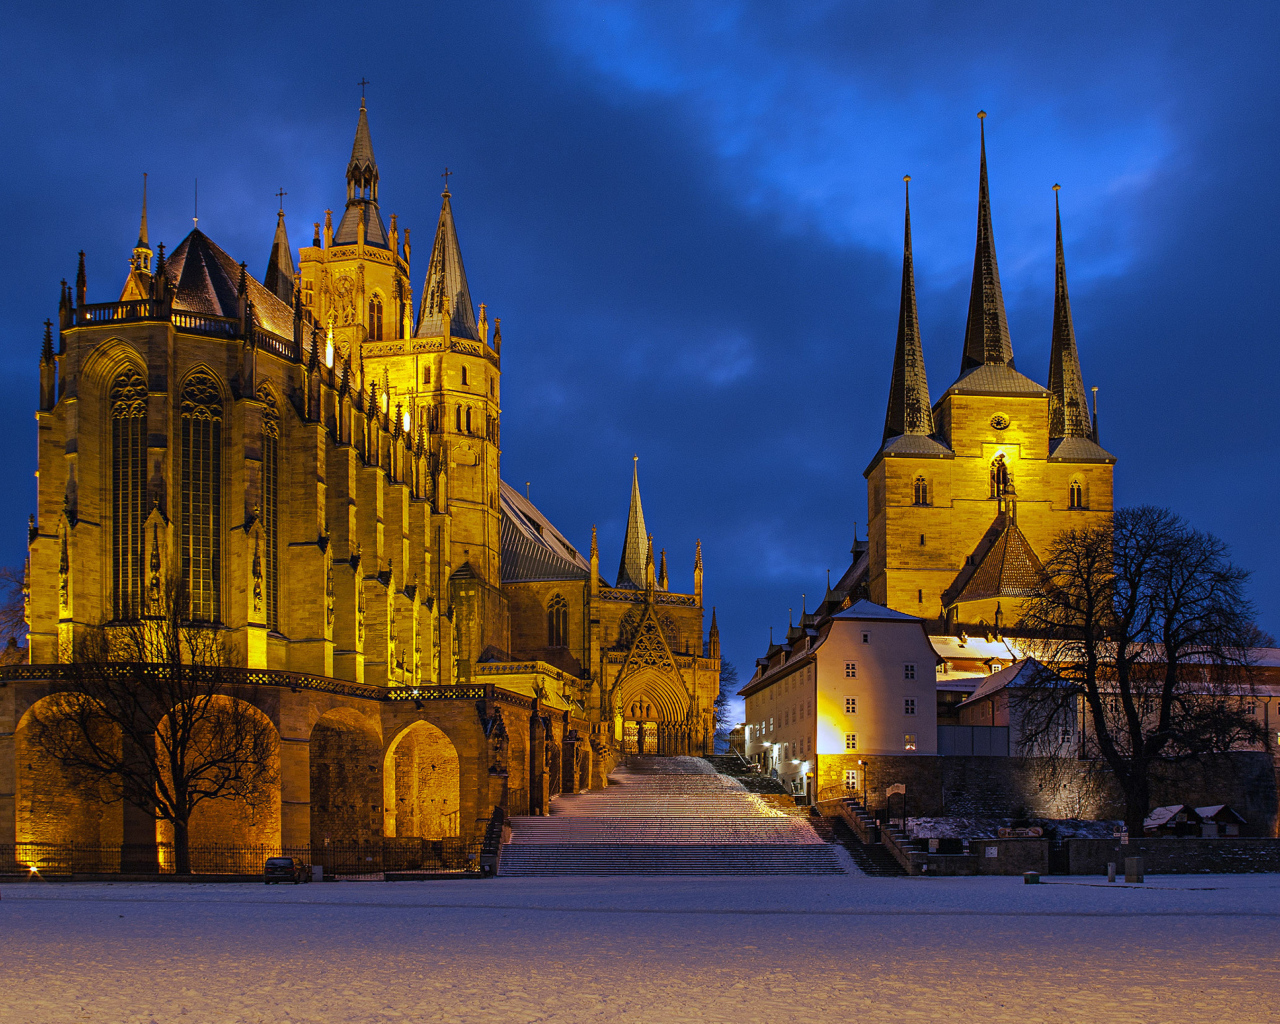 The Catholic Church in Erfurt in the evening, Germany